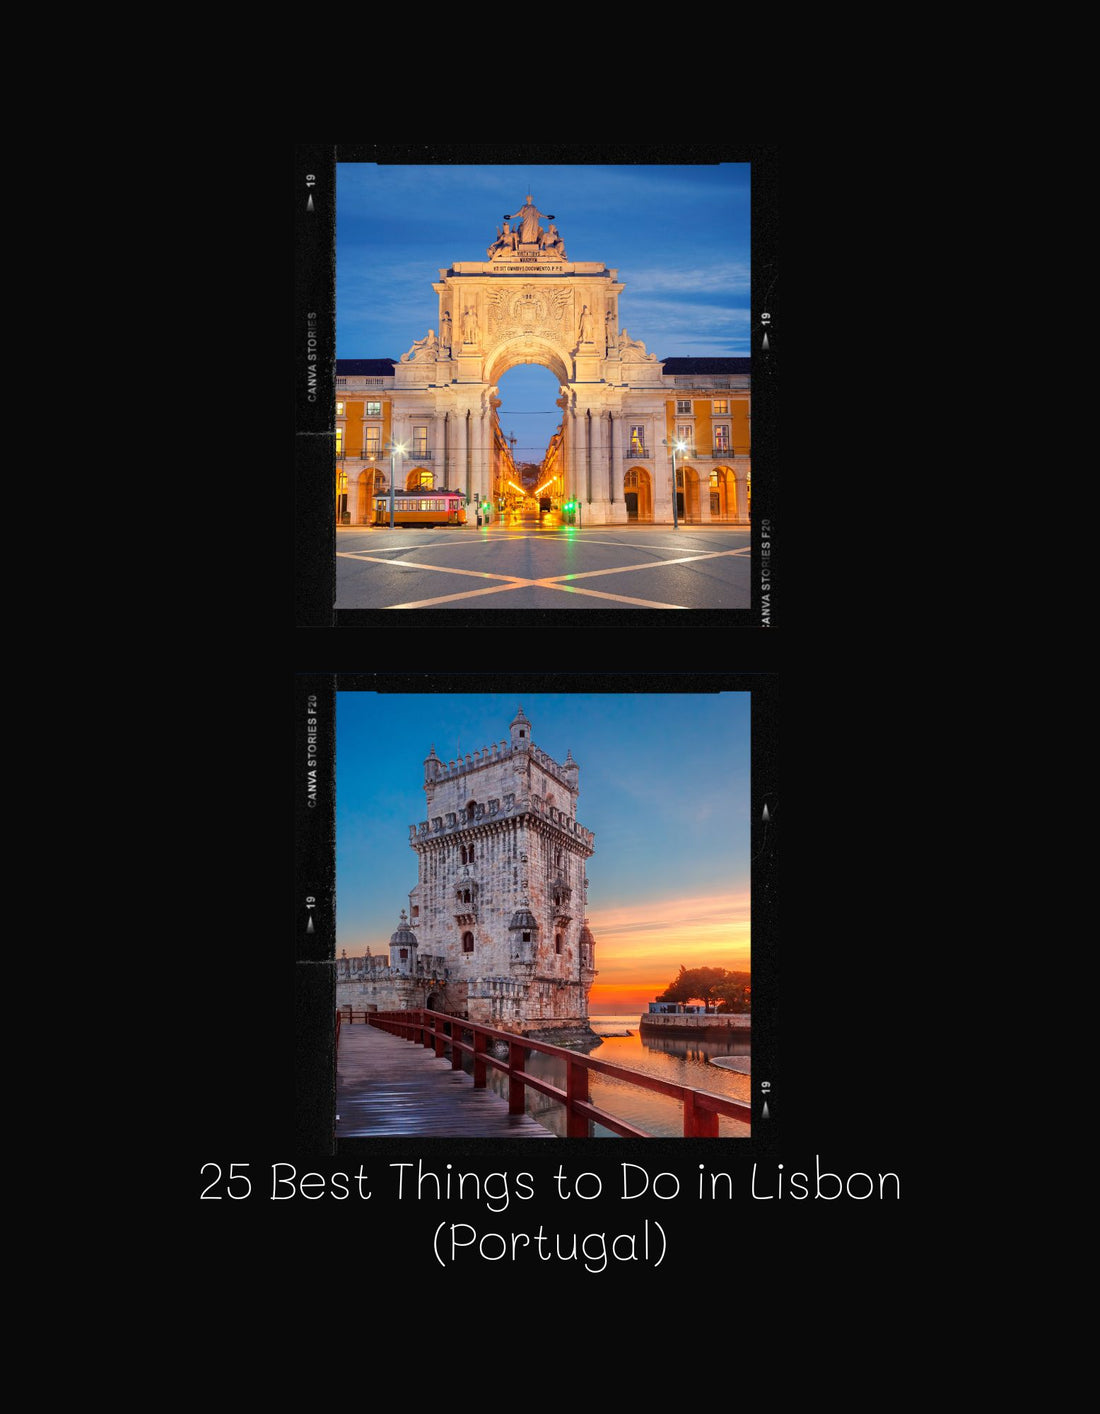 25 Best Things to Do in Lisbon (Portugal)